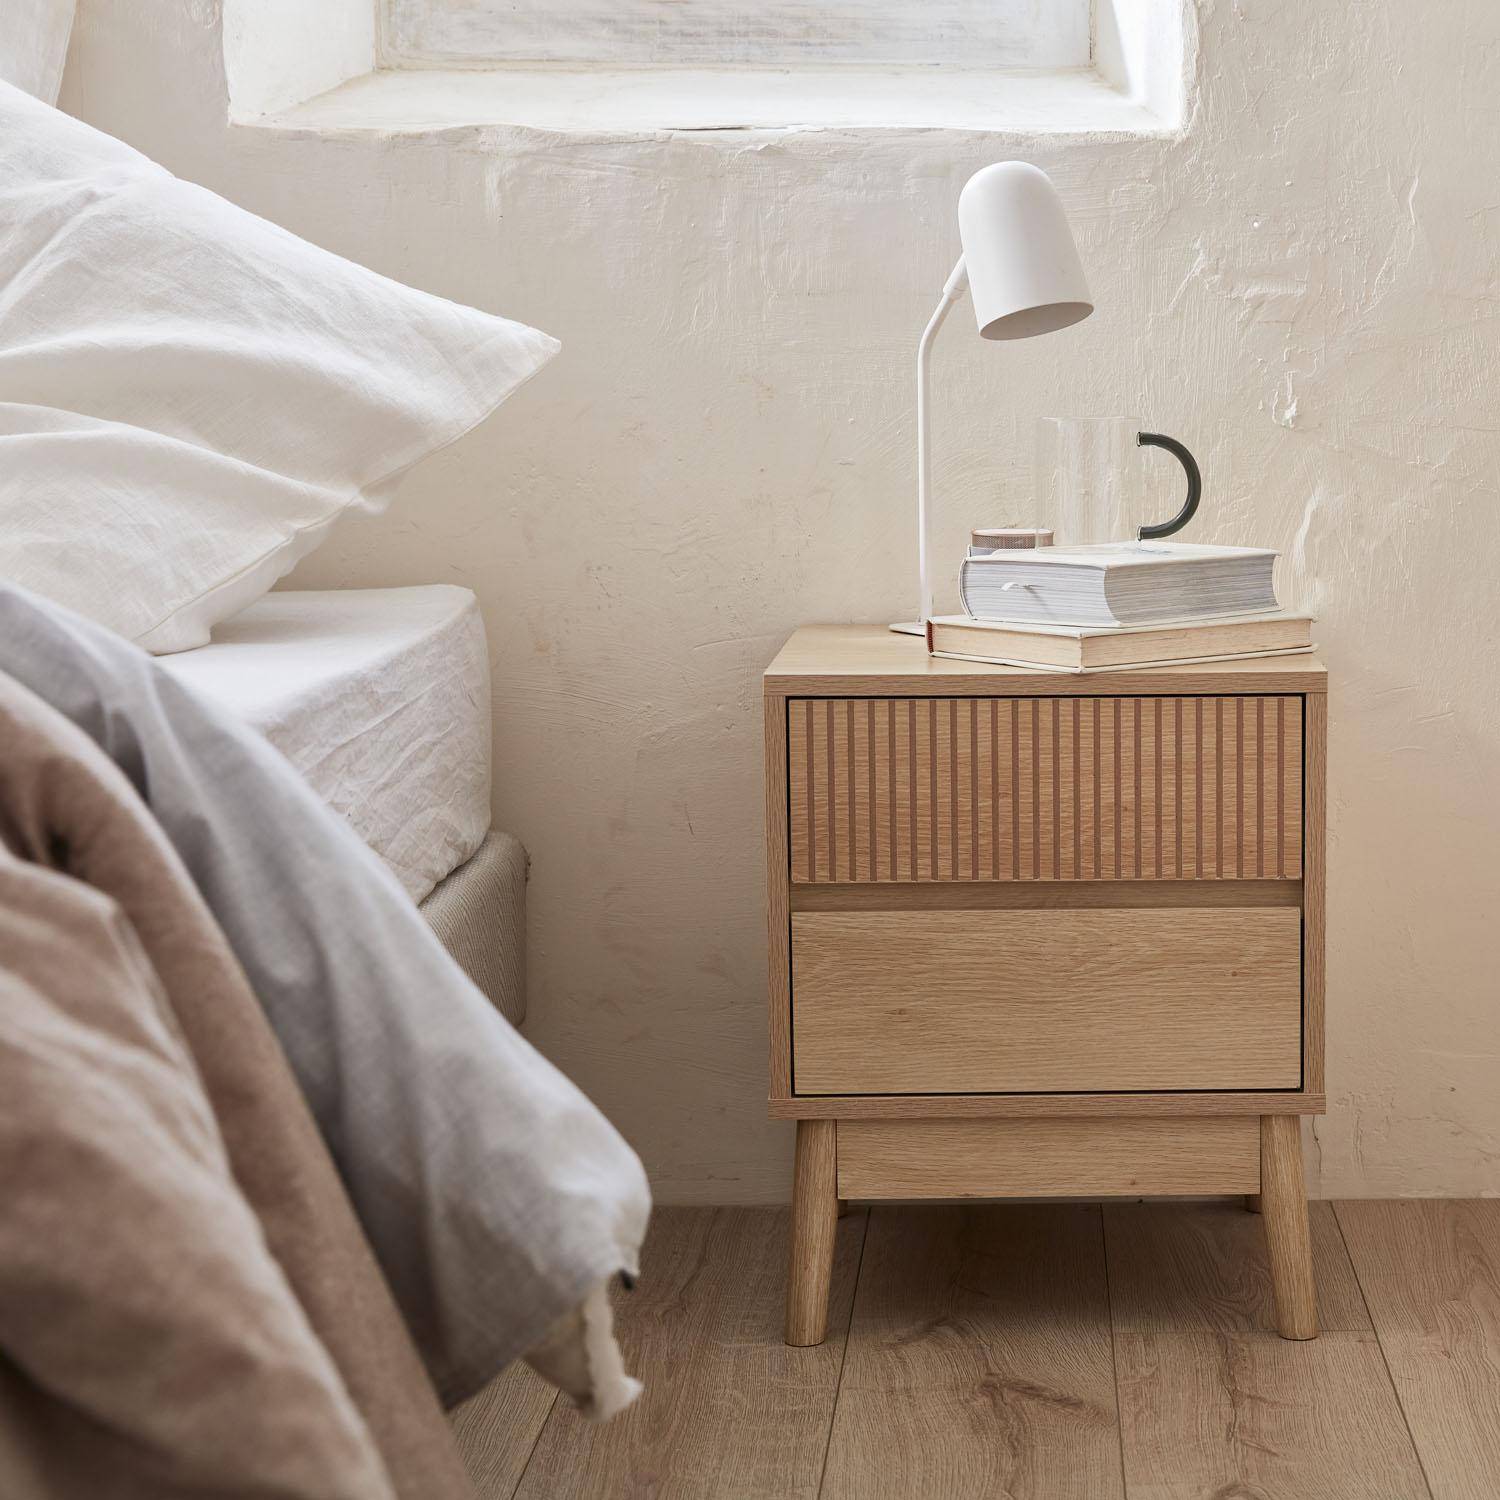 Grooved wooden bedside table with 2 drawers, 40x39x48cm, Linear - Natural Wood colour,sweeek,Photo1